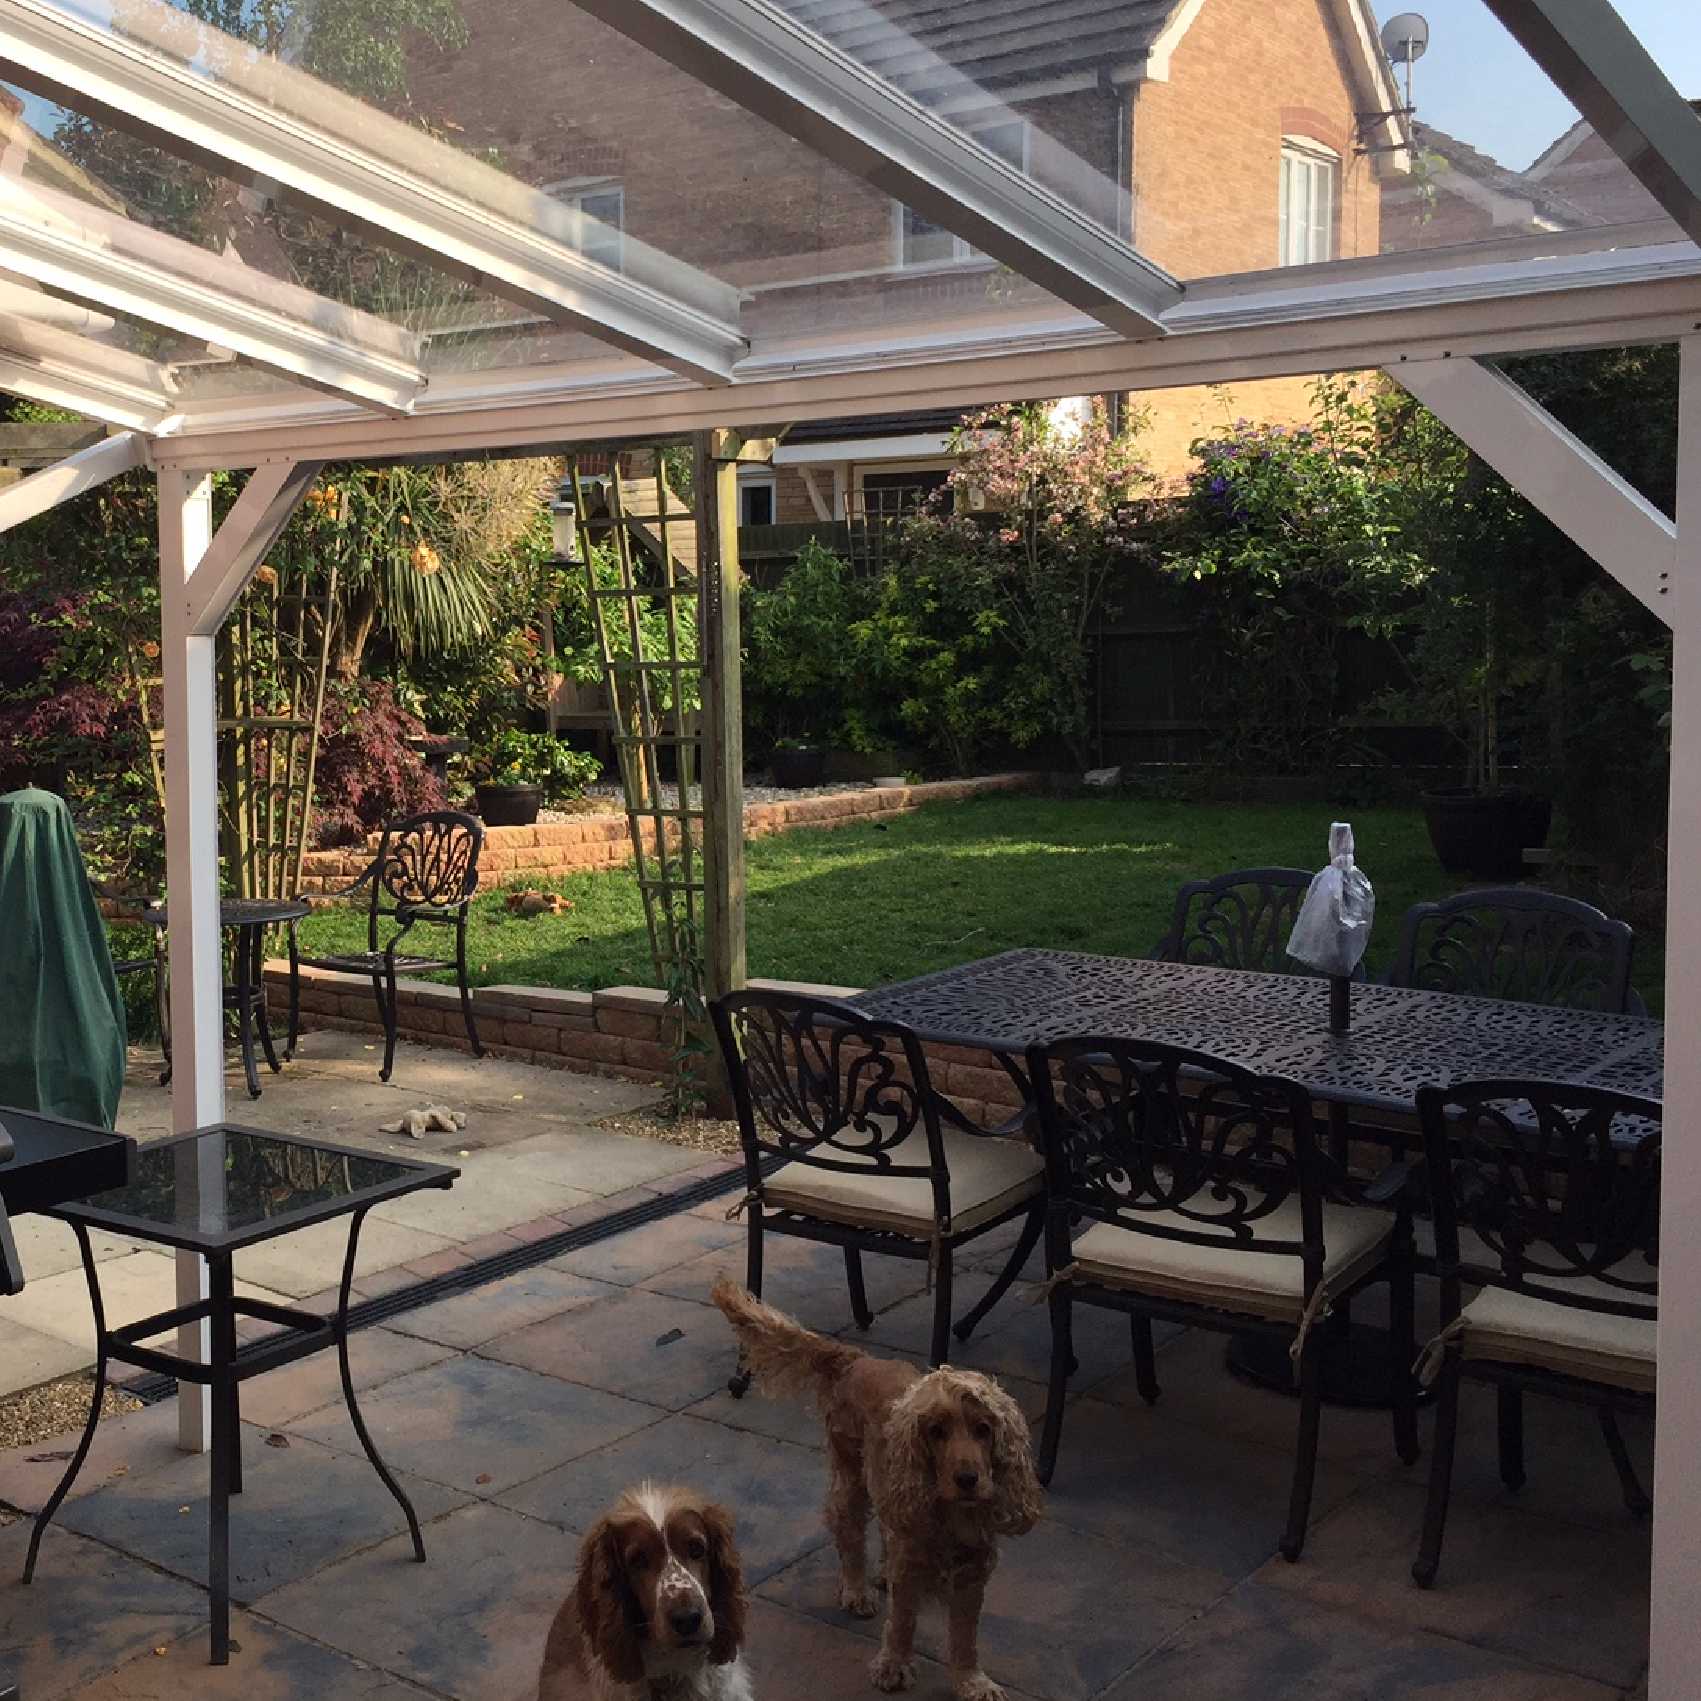 Affordable Omega Smart Lean-To Canopy, White UNGLAZED for 6mm Glazing - 4.2m (W) x 1.5m (P), (3) Supporting Posts